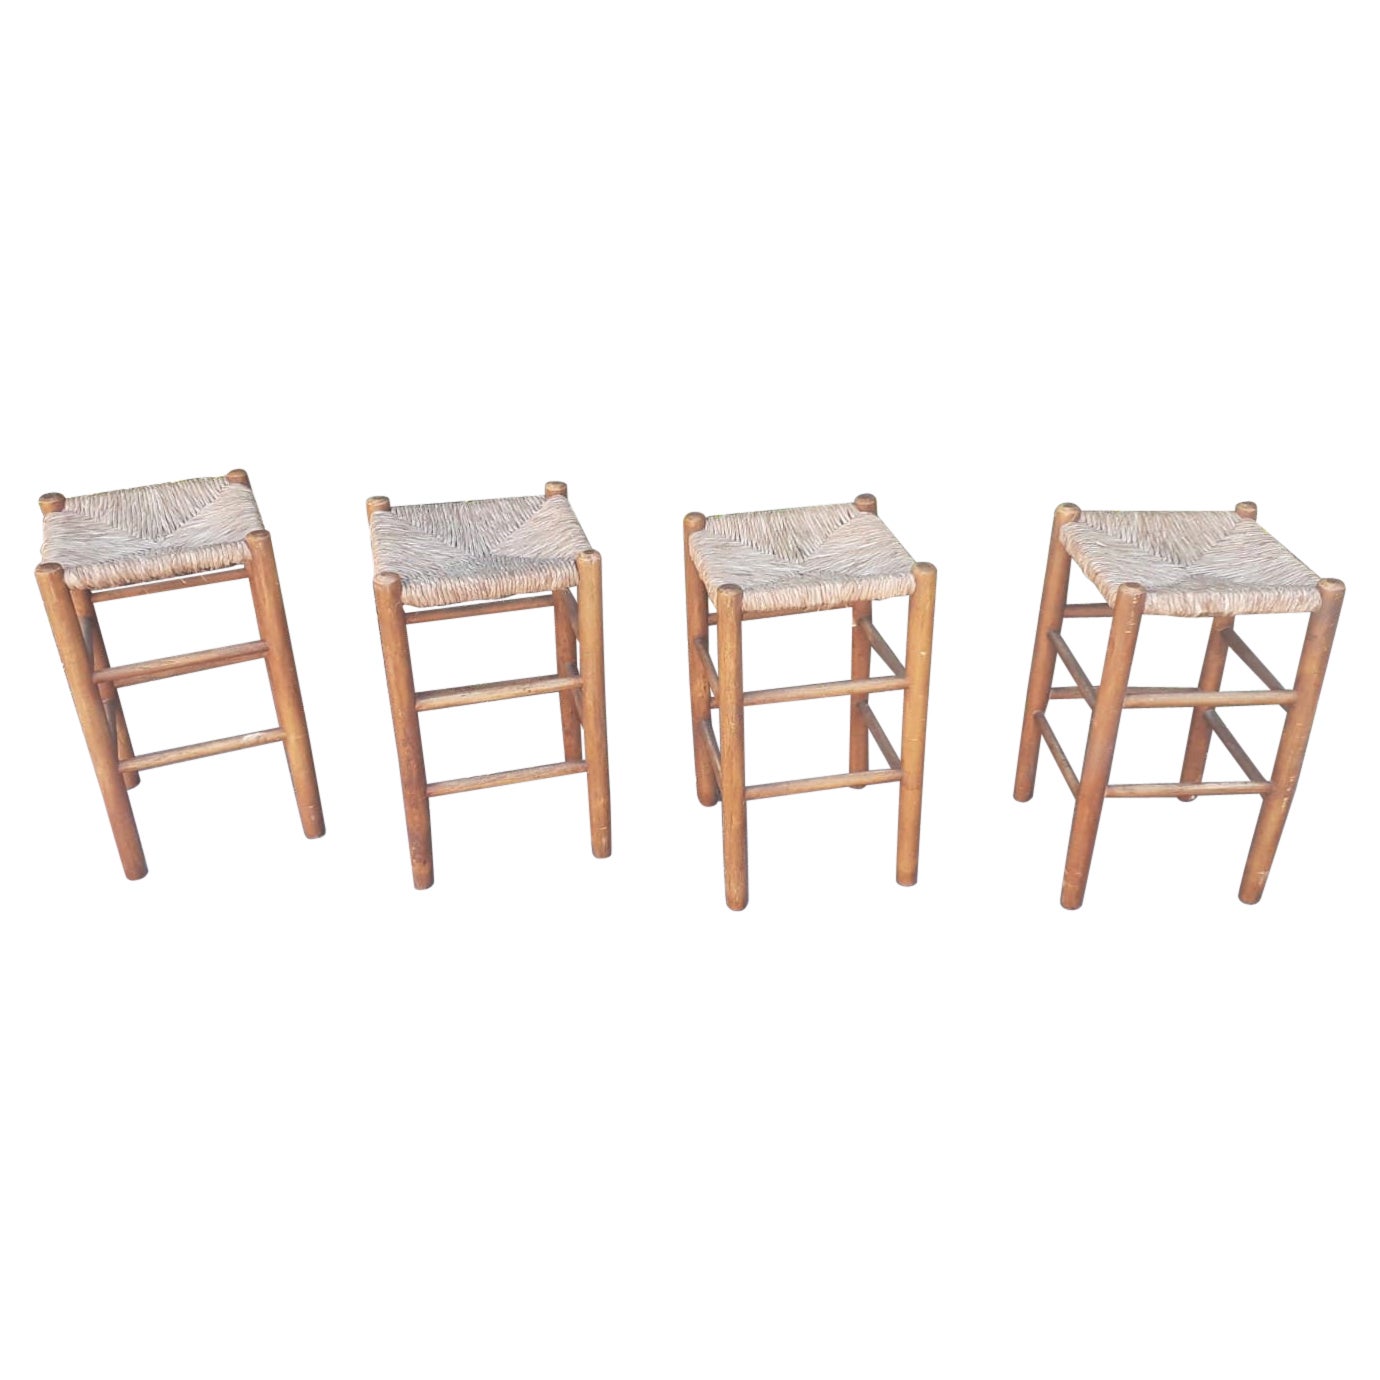 Four Wood and Straw High Stools For Sale